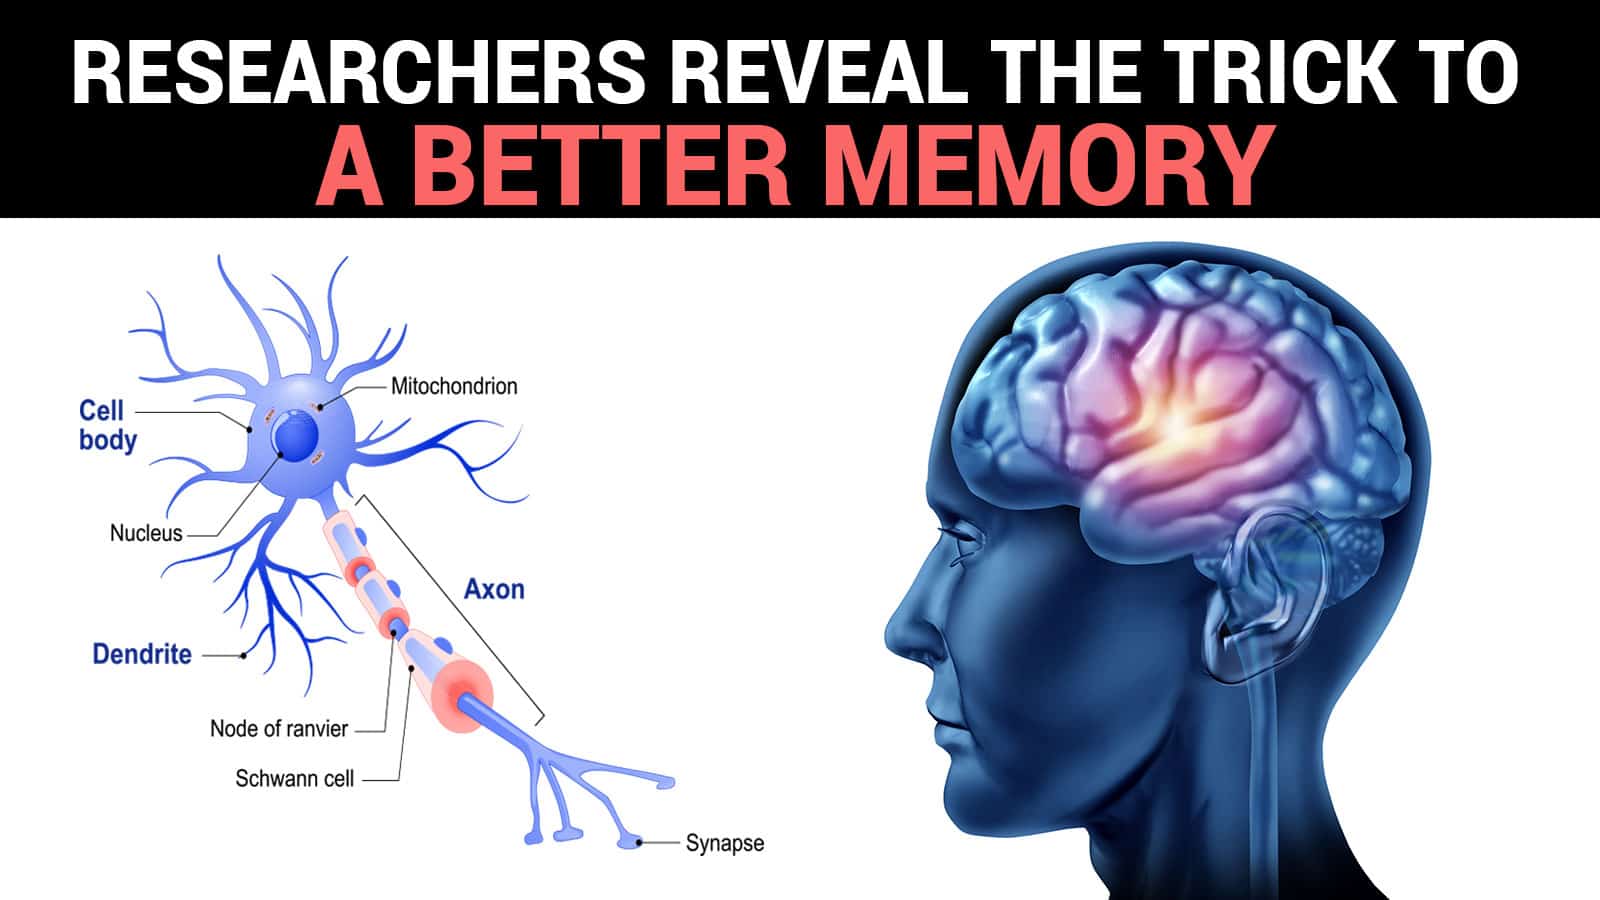 Researchers Reveal the Trick To Improving Your Memory